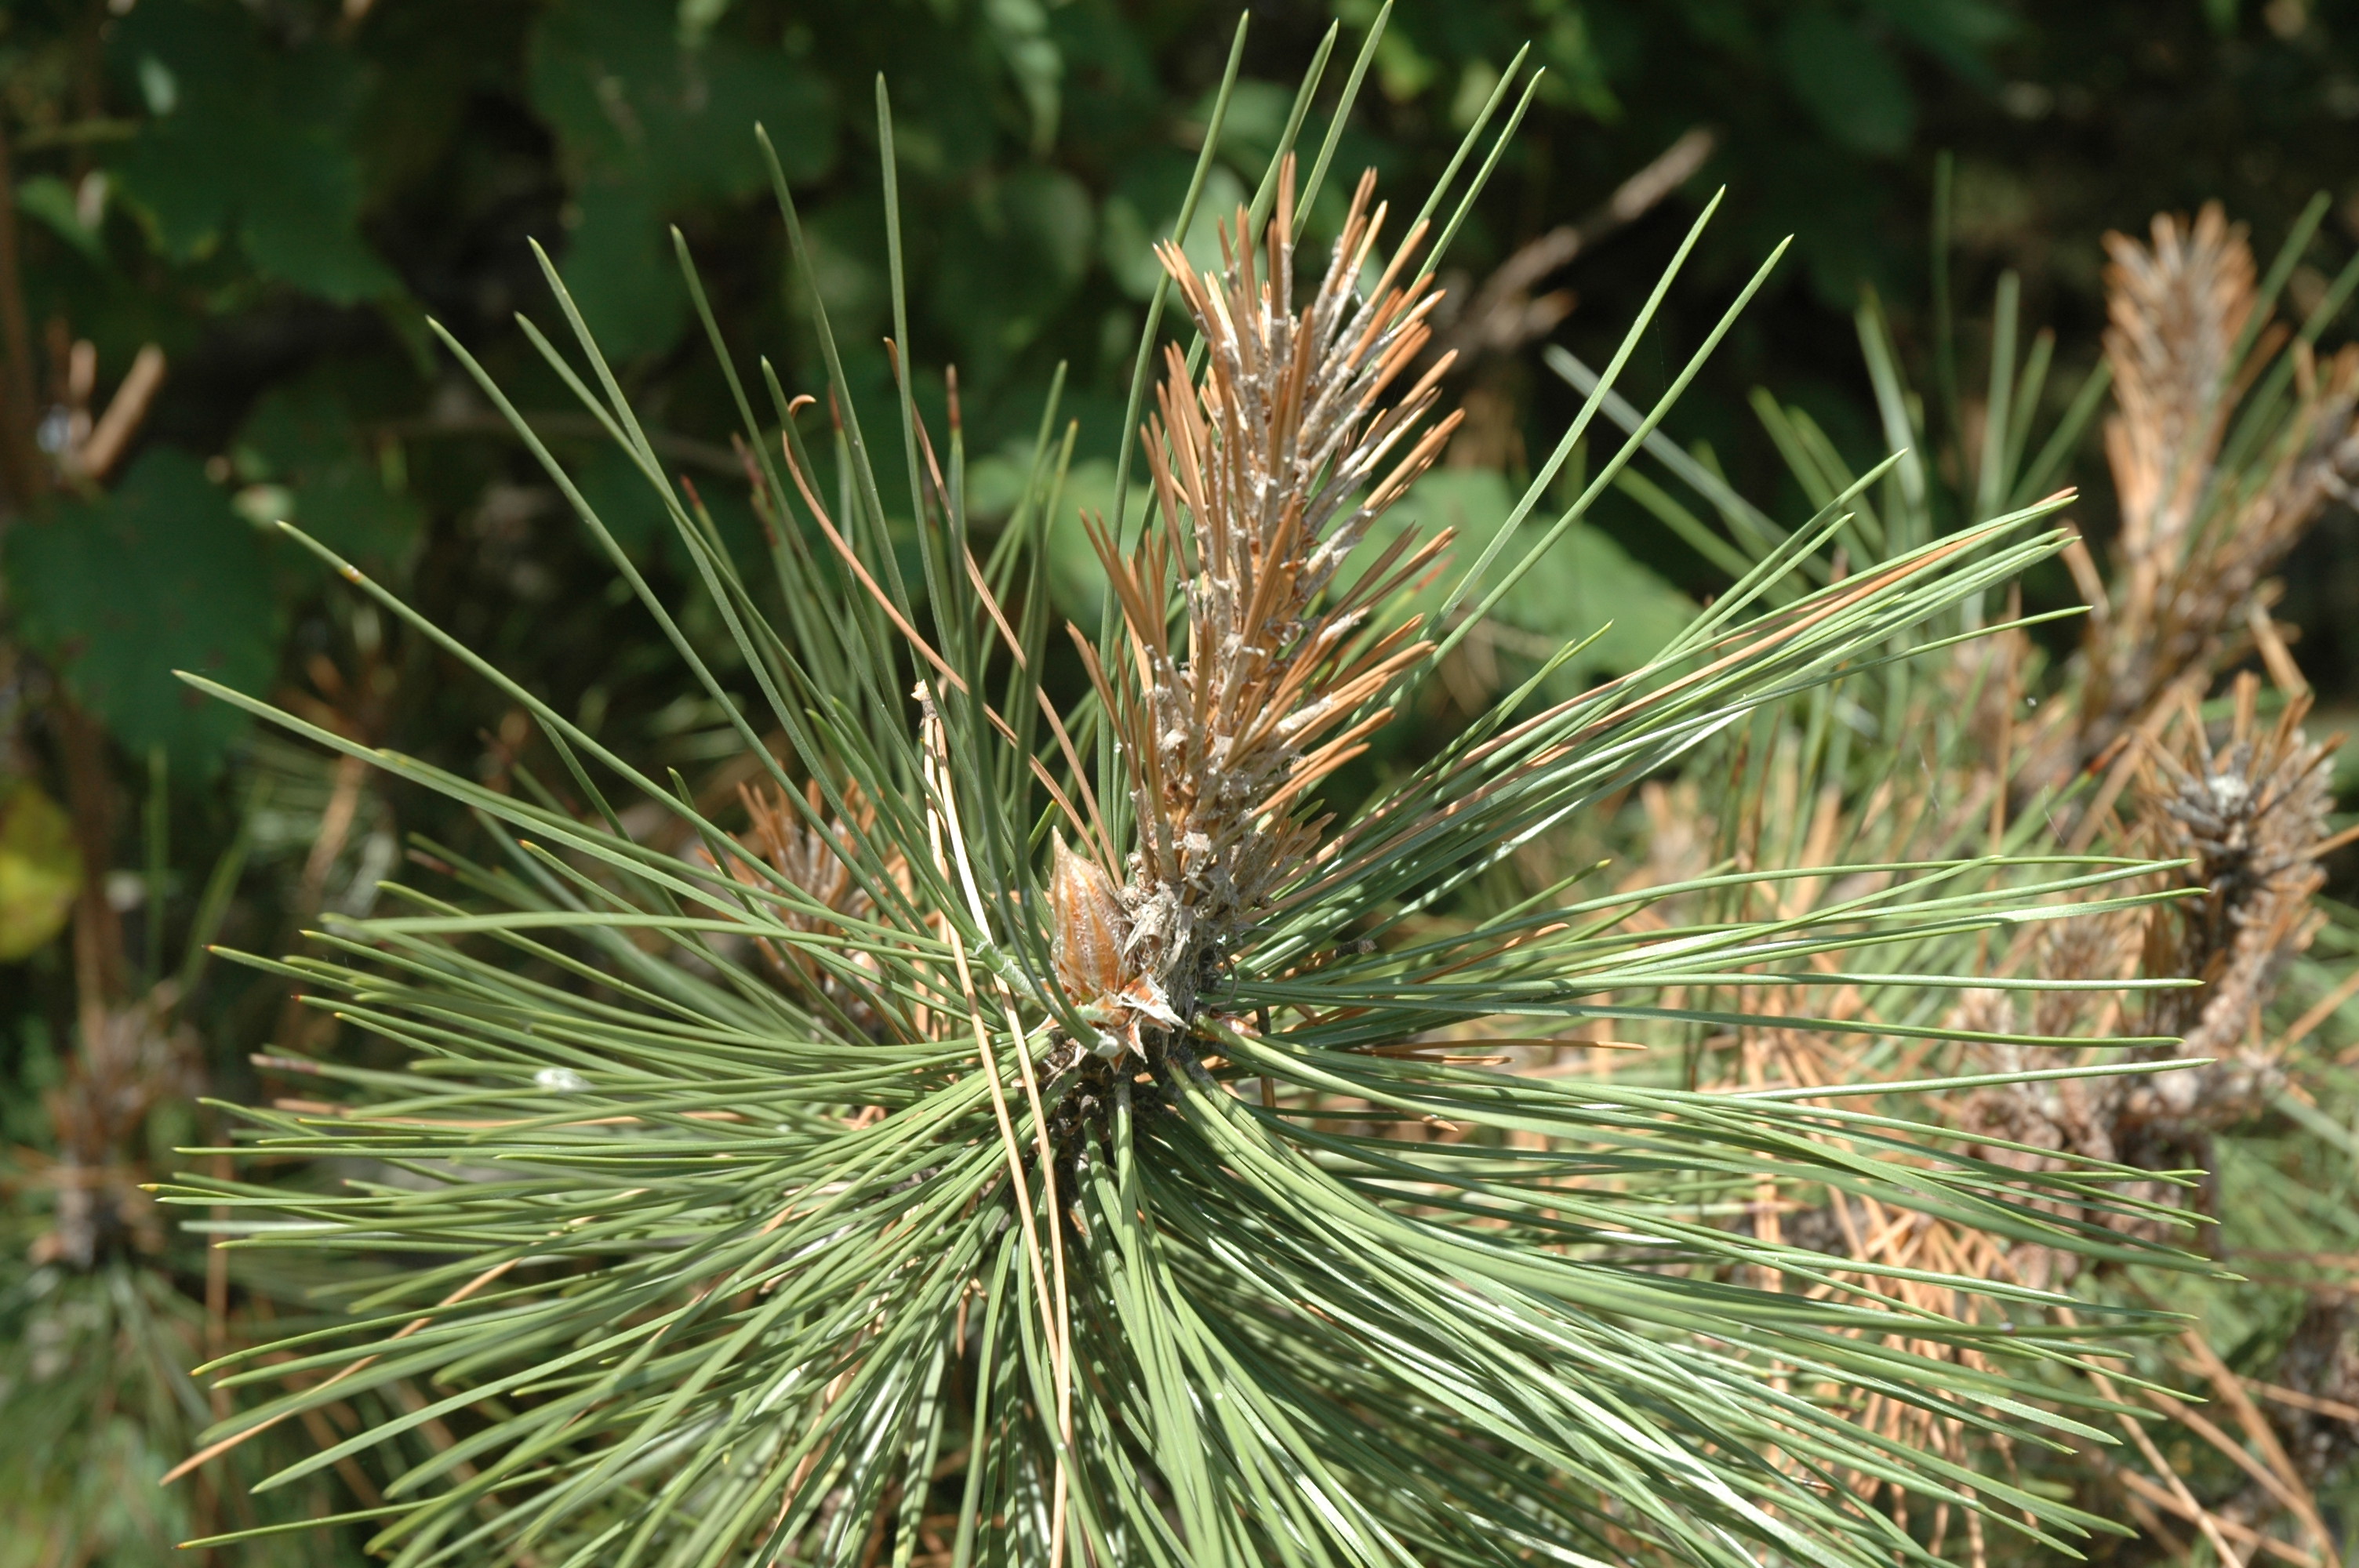 Pine tip blight - Is it happening in a tree near you? | K-State ...